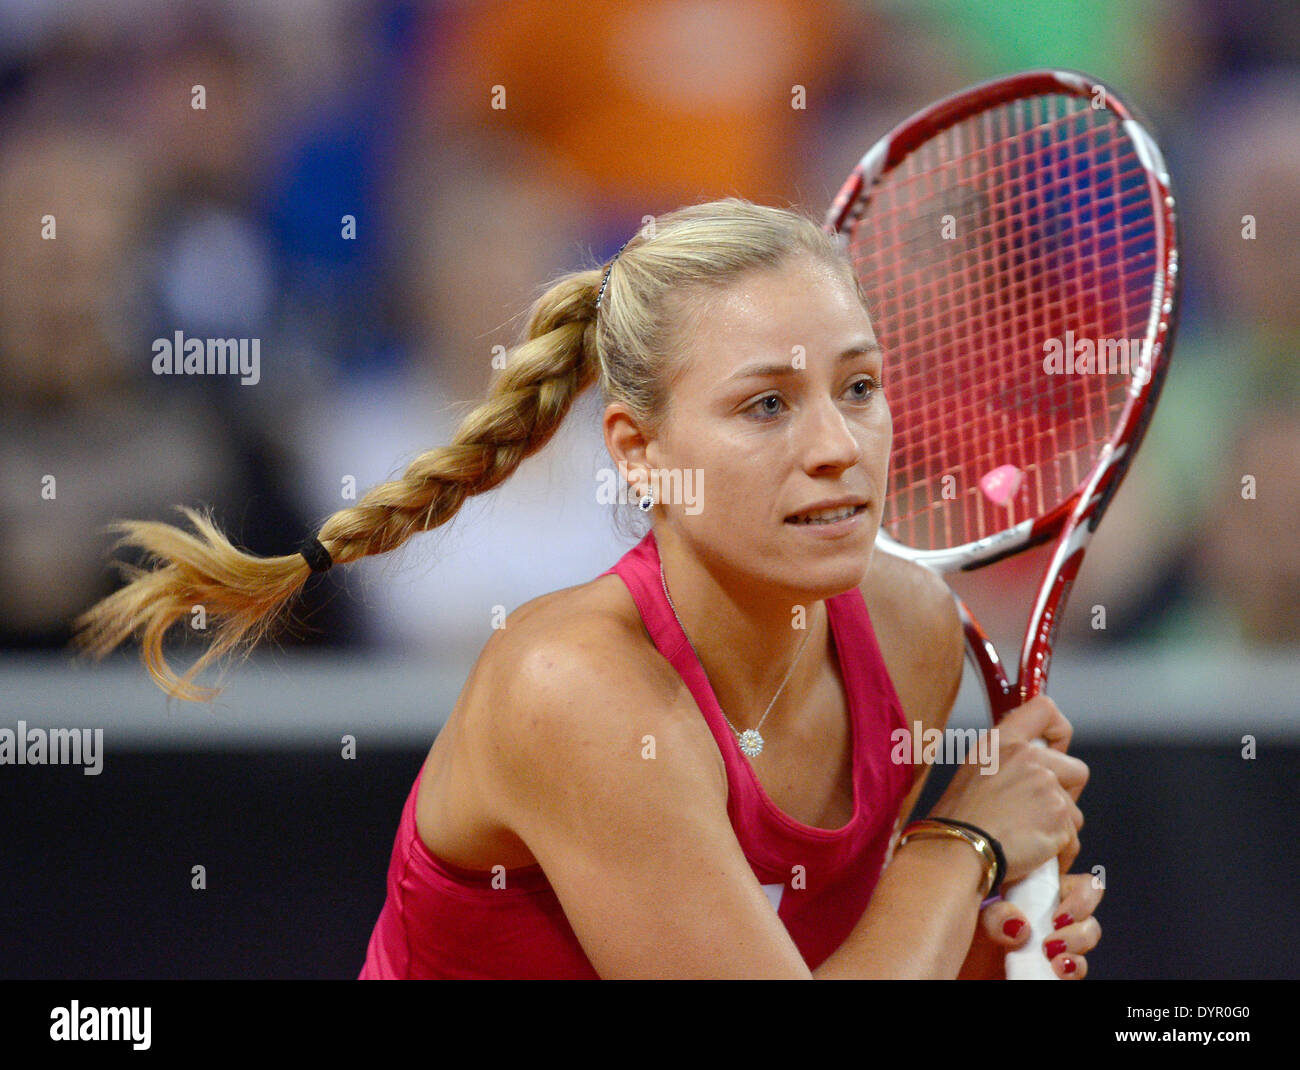 Stuttgart, Germany. 24th Apr, 2014. Germany's Angelique Kerber plays the ball during the second round match for the WTA tennis tournament against Navarro of Spain in Stuttgart, Germany, 24 April 2014. Photo: DANIEL MAURER/dpa/Alamy Live News Stock Photo